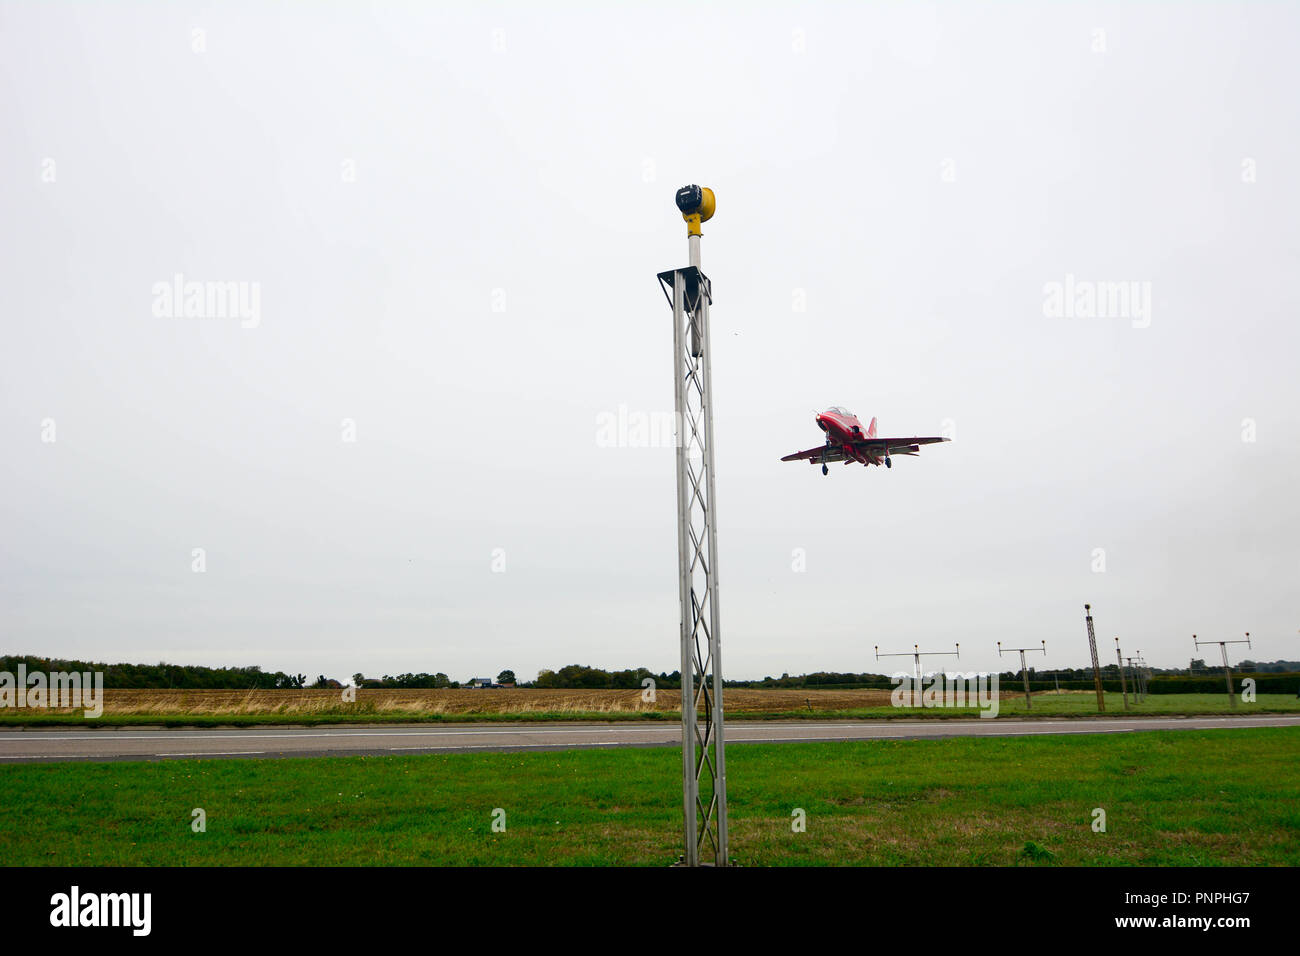 Cambridge UK, 2018-September-22. The Red Arrows arriving at Marshall Aerospace before their schedualed air display at Duxford later today to celebrate 100 years of the RAF. Stock Photo